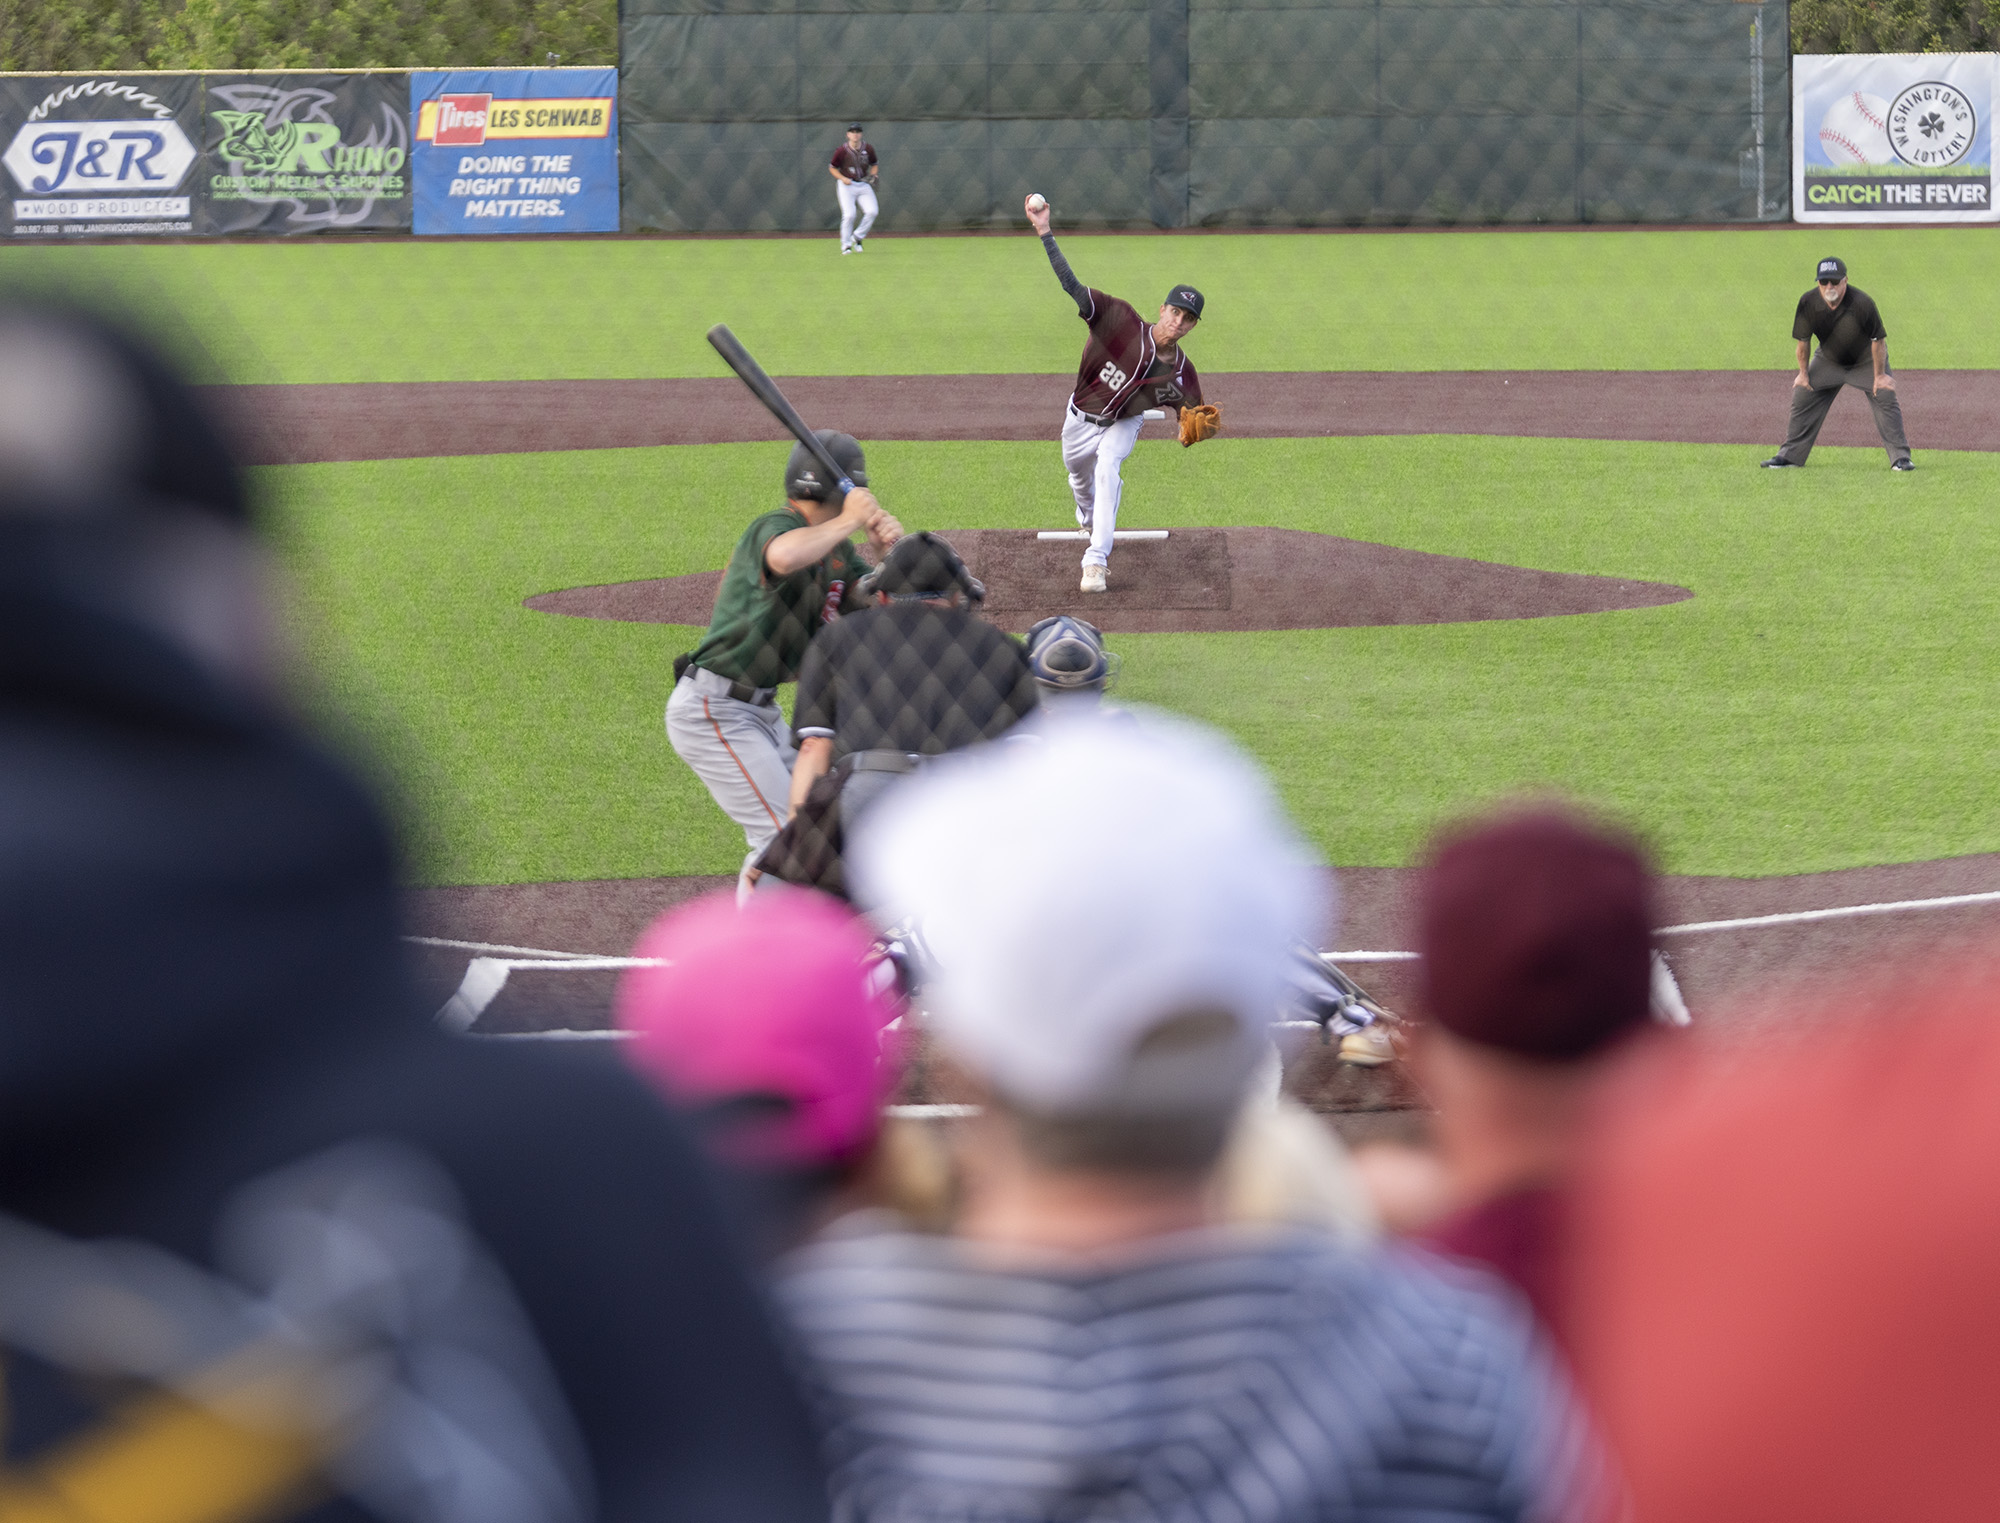 Raptors pitcher Jacob Kokeny throws the ball Wednesday, June 1, 2022, during an exhibition game between the Ridgefield Raptors and the Cowlitz Black Bears at the Ridgefield Outdoor Recreation Complex.